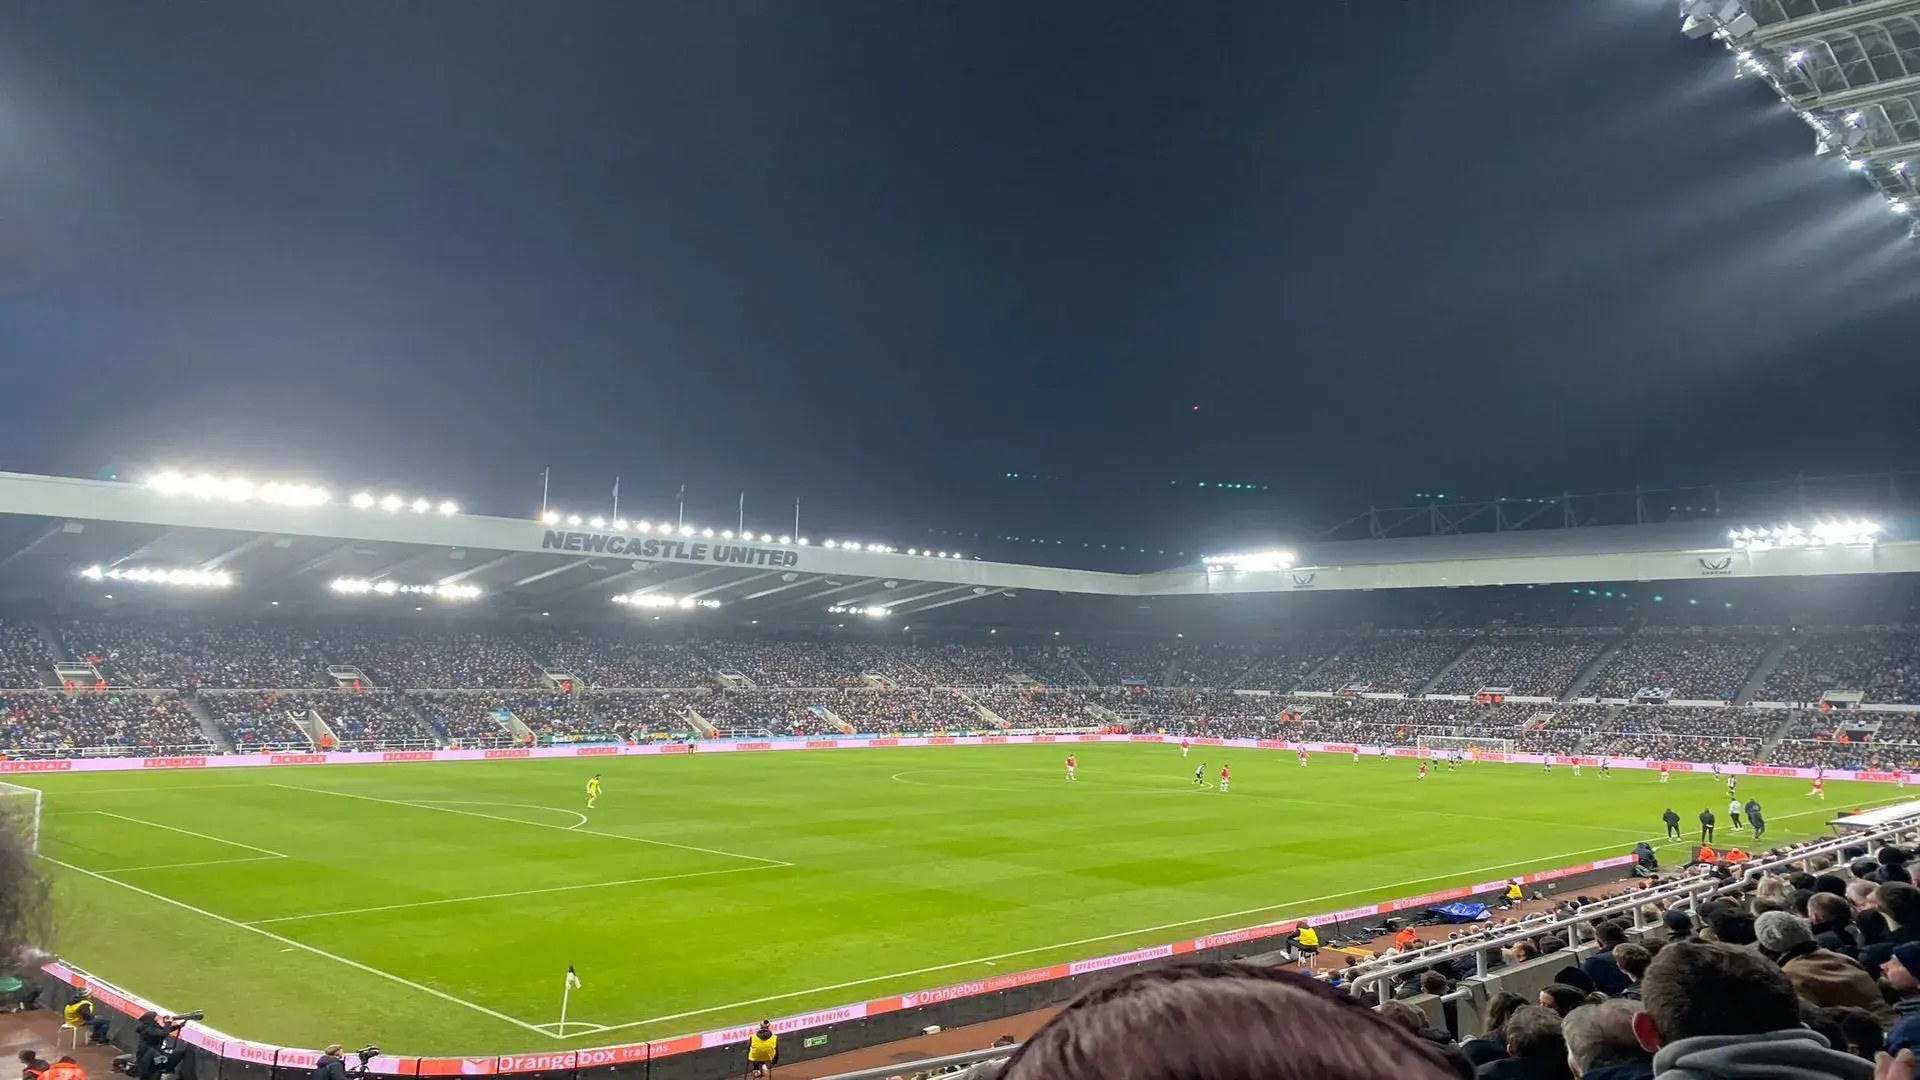 St James’ Park, Newcastle United - Top 10 Insanely biggest stadiums in England now